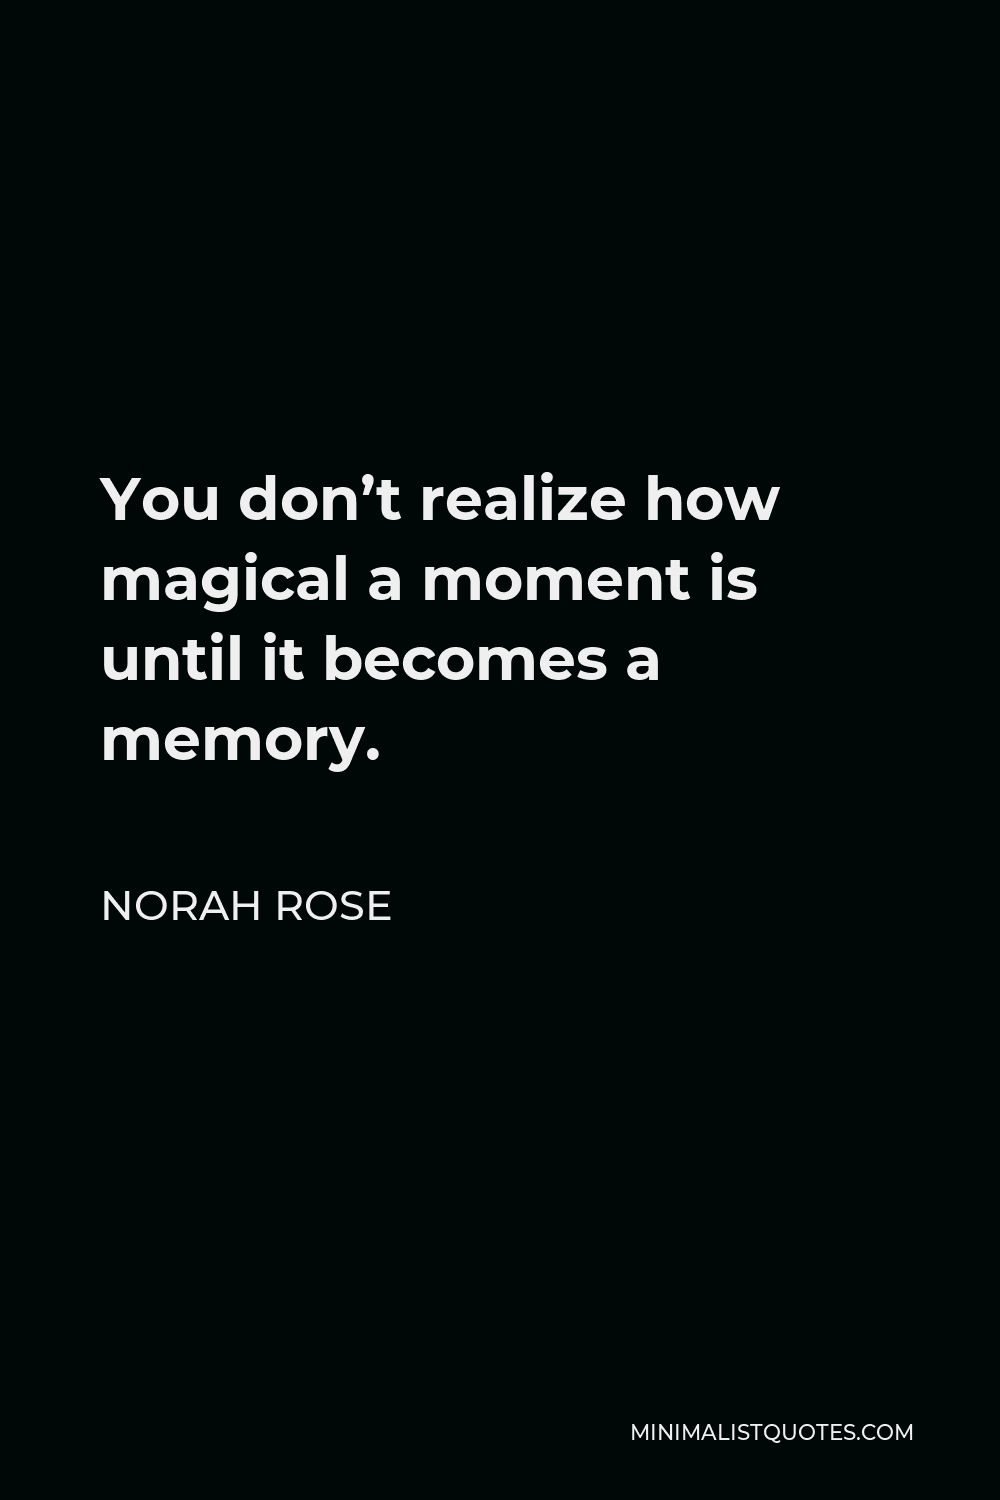 Norah Rose Quote - You don’t realize how magical a moment is until it becomes a memory.